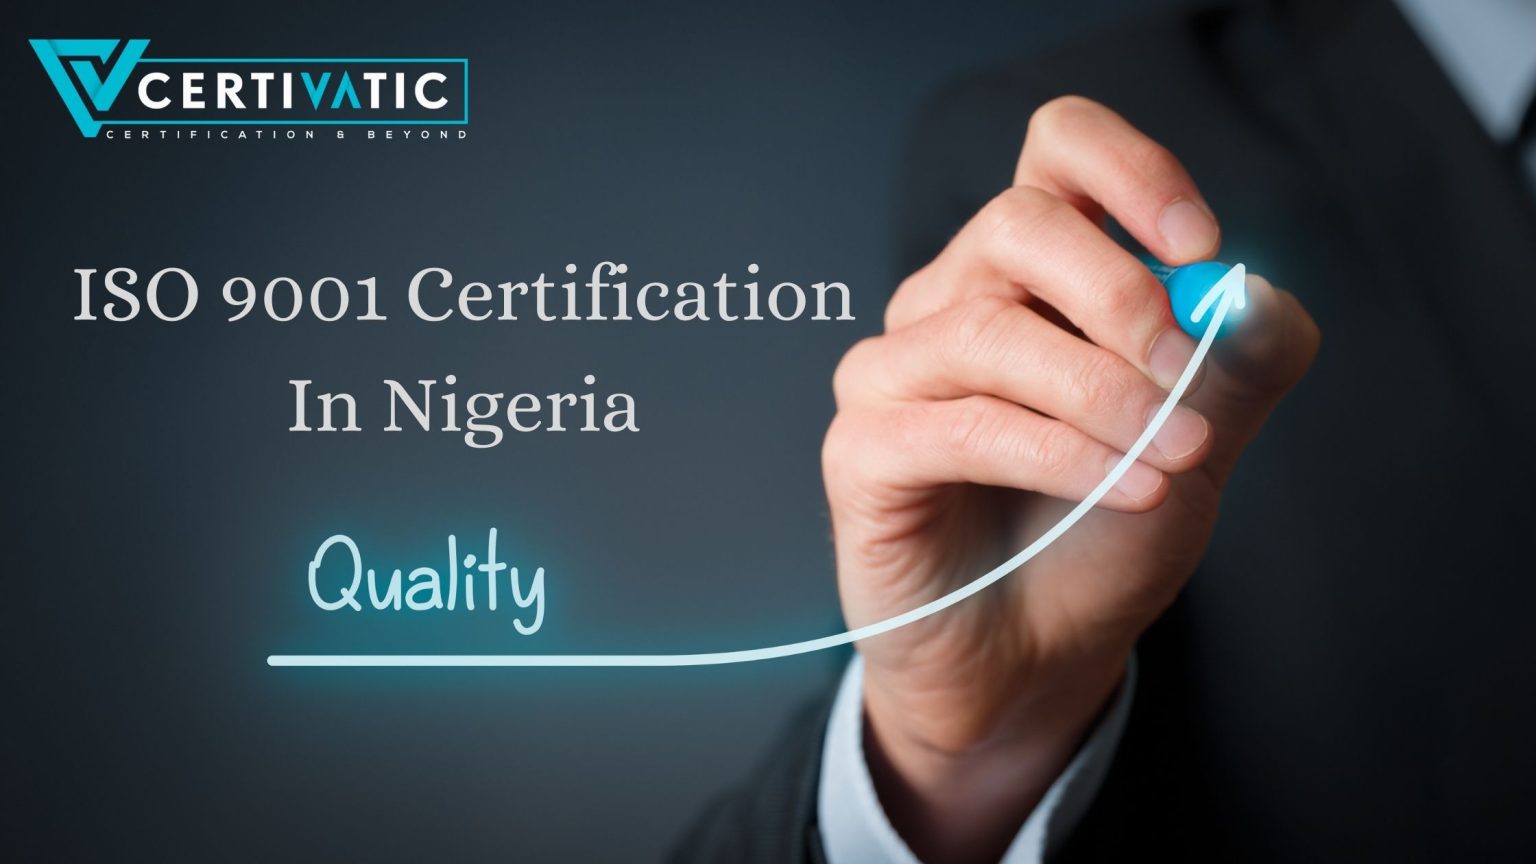 What Are the Advantages Of ISO 9001 Certification In Nigeria?